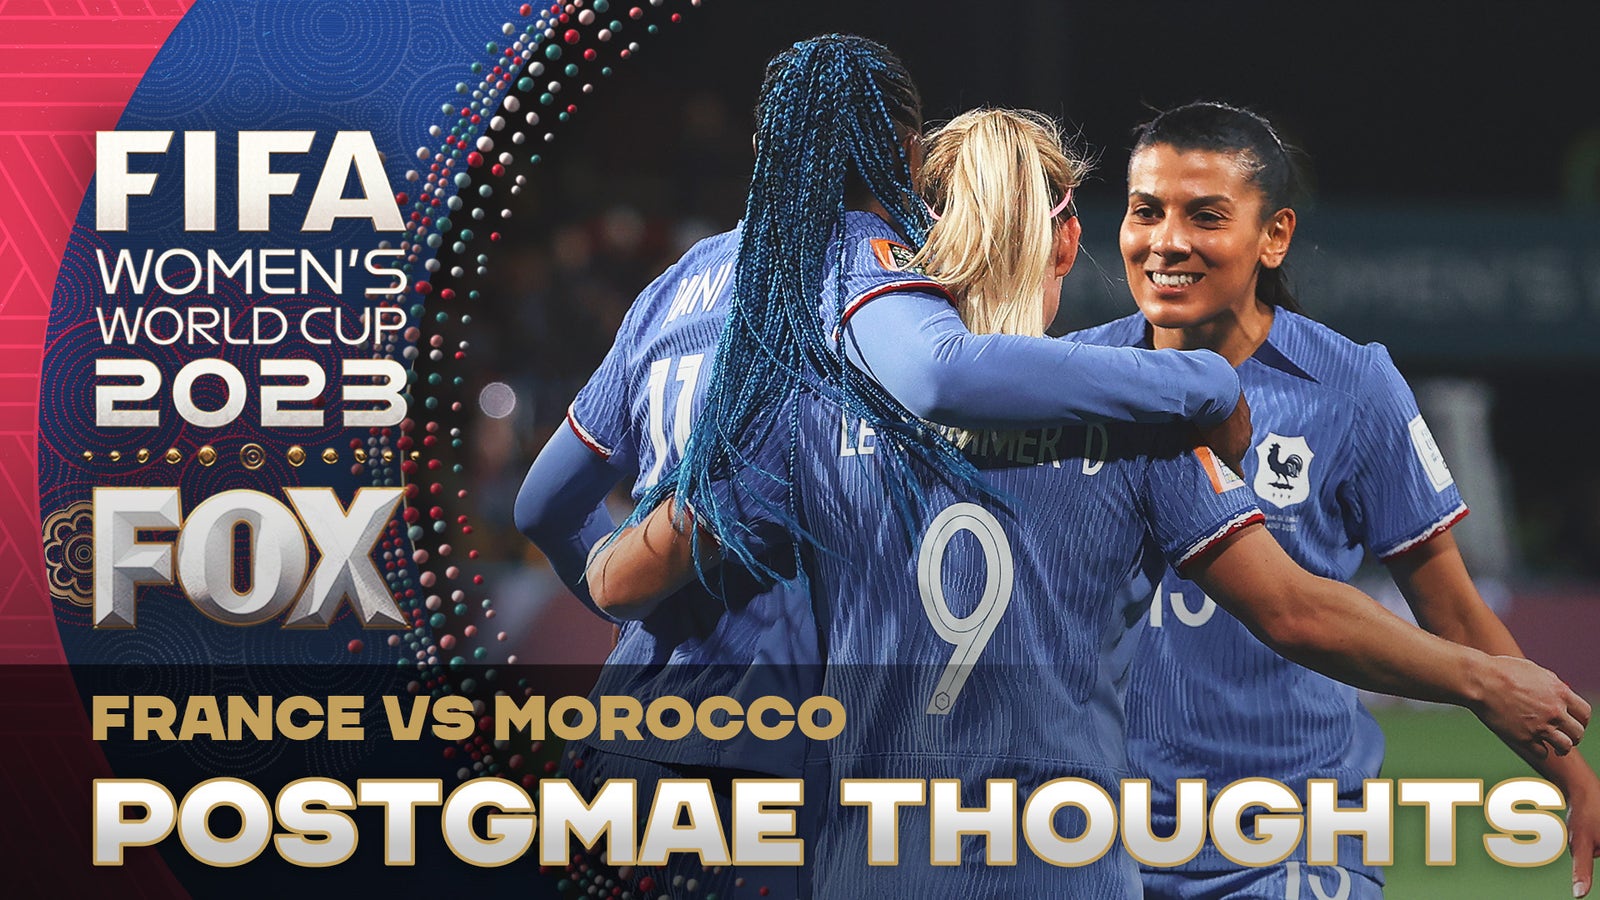 France vs. Morocco postgame thoughts